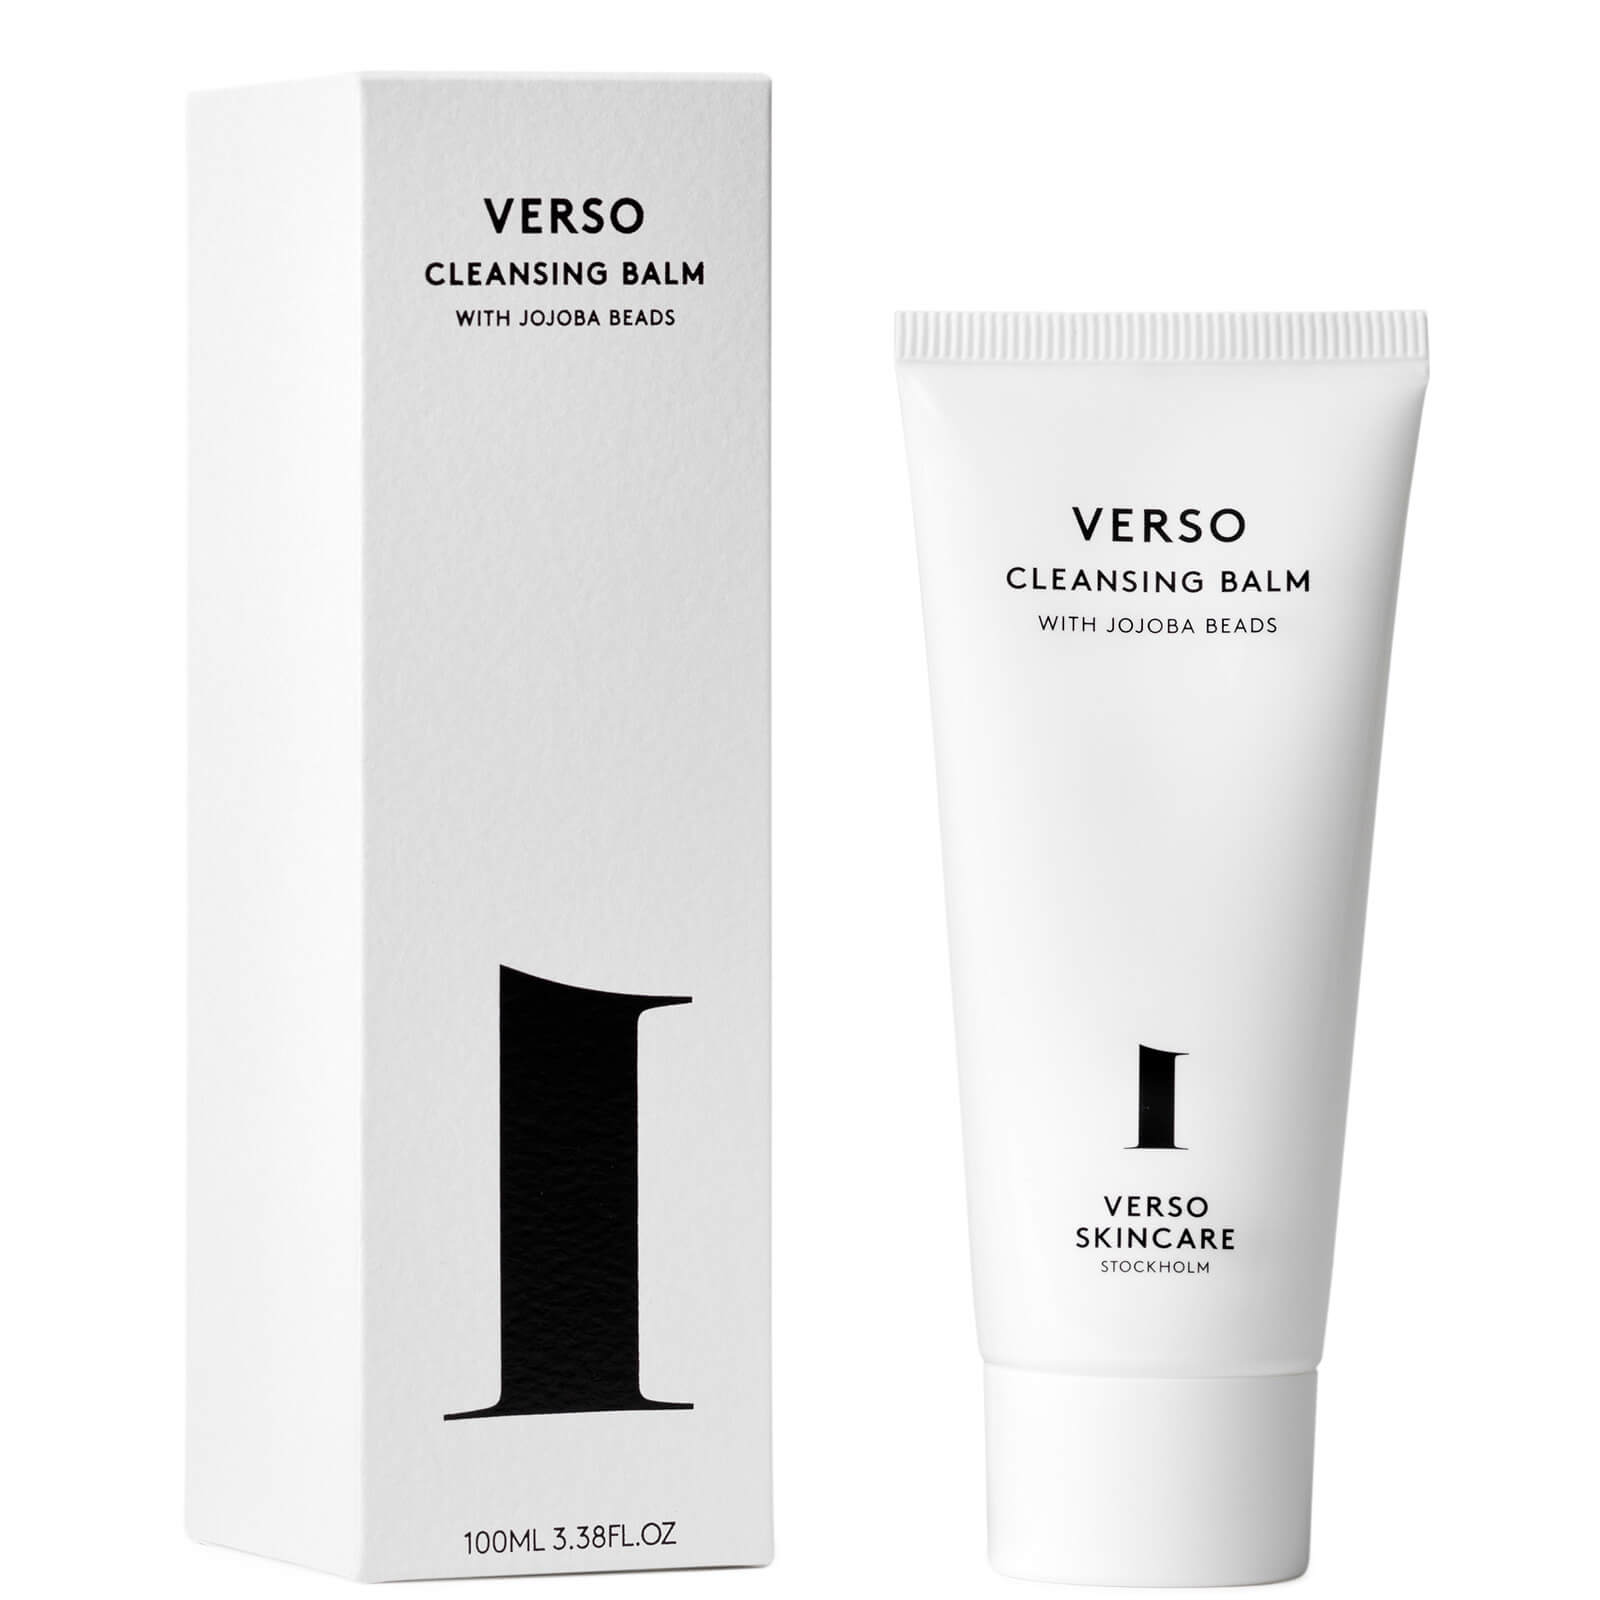 Verso Cleansing Balm, 100ml - One Size In Colorless